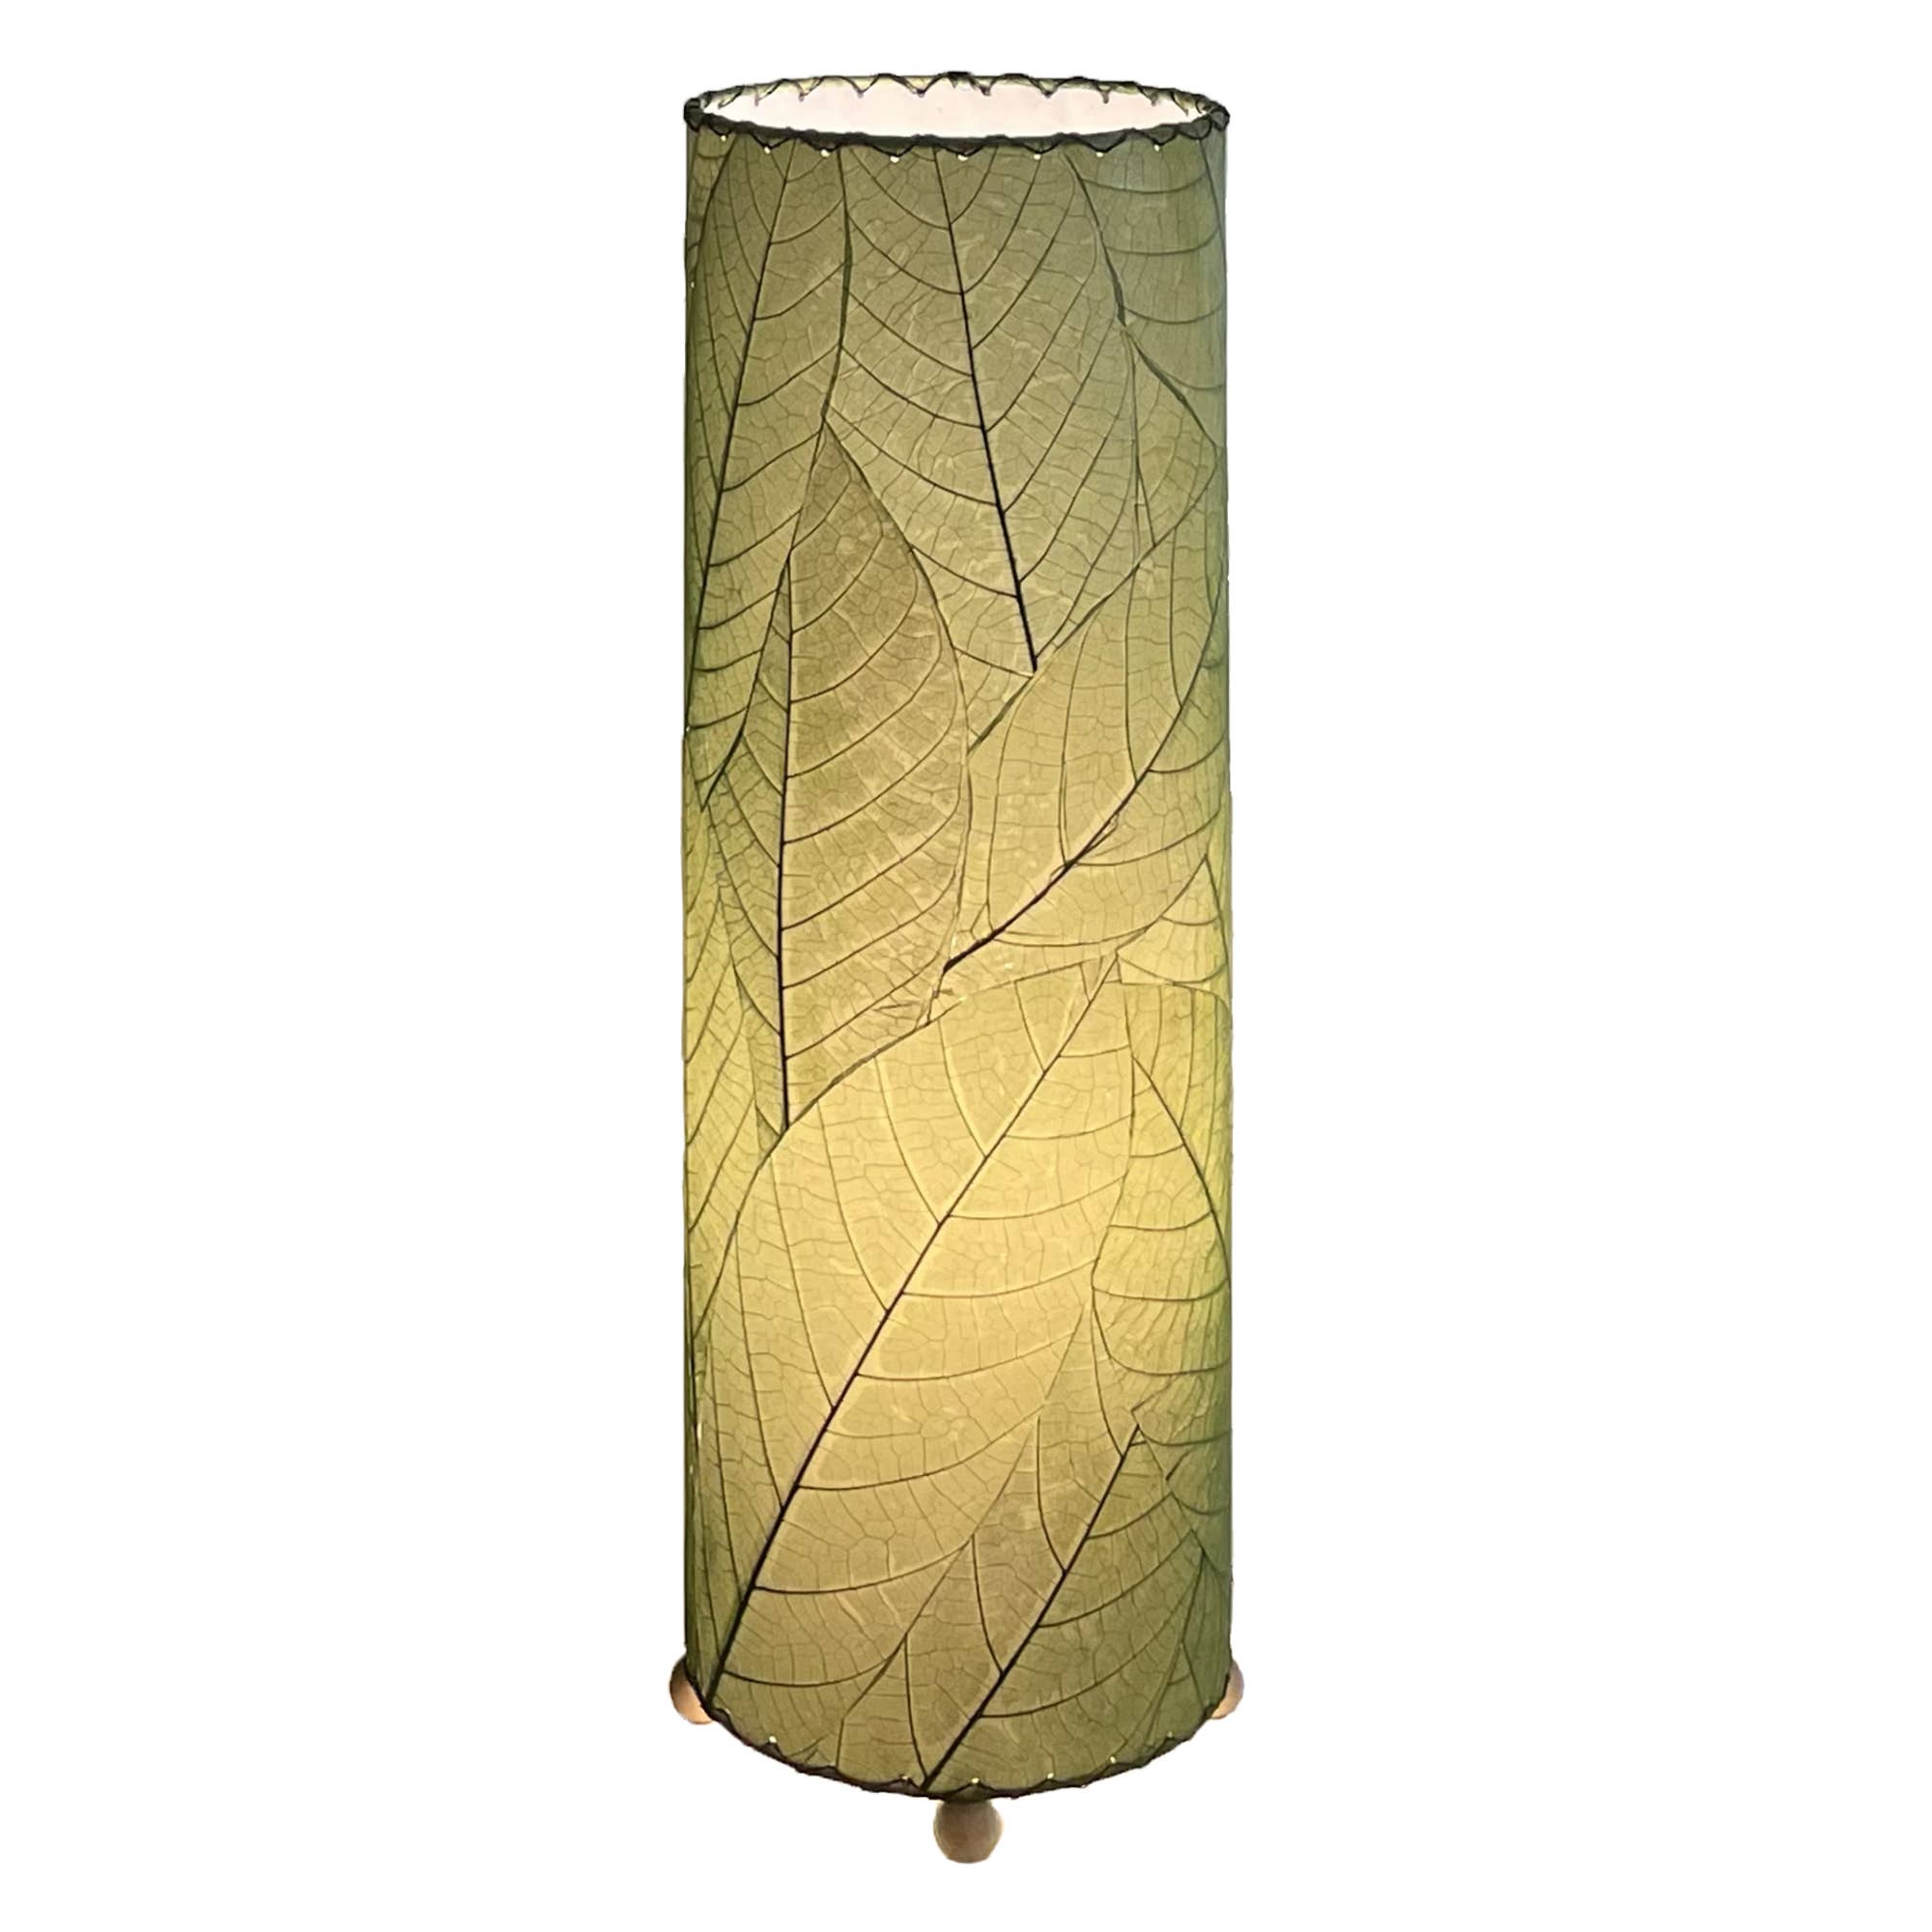 24 Inch Cocoa Leaf Cylinder Table Lamp Green